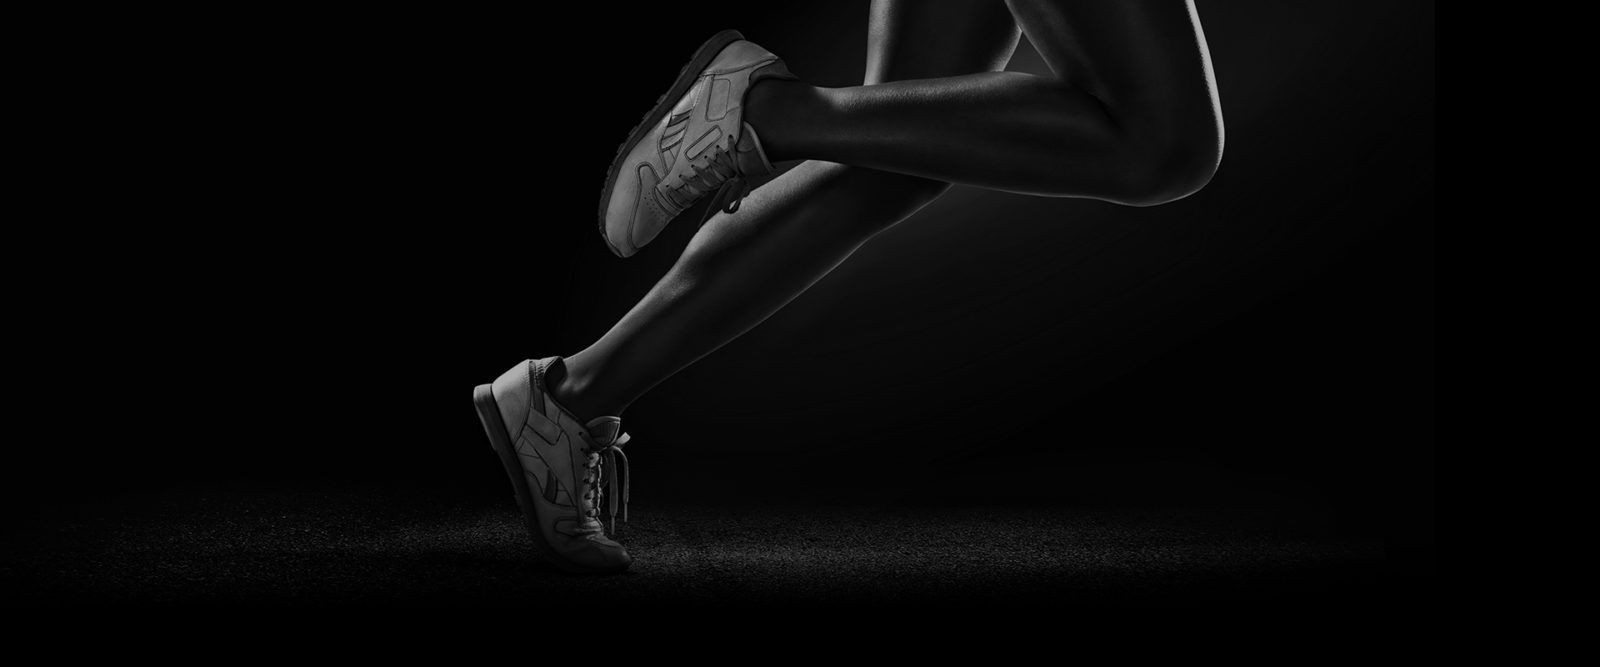 Stress Fractures … What are the risks?